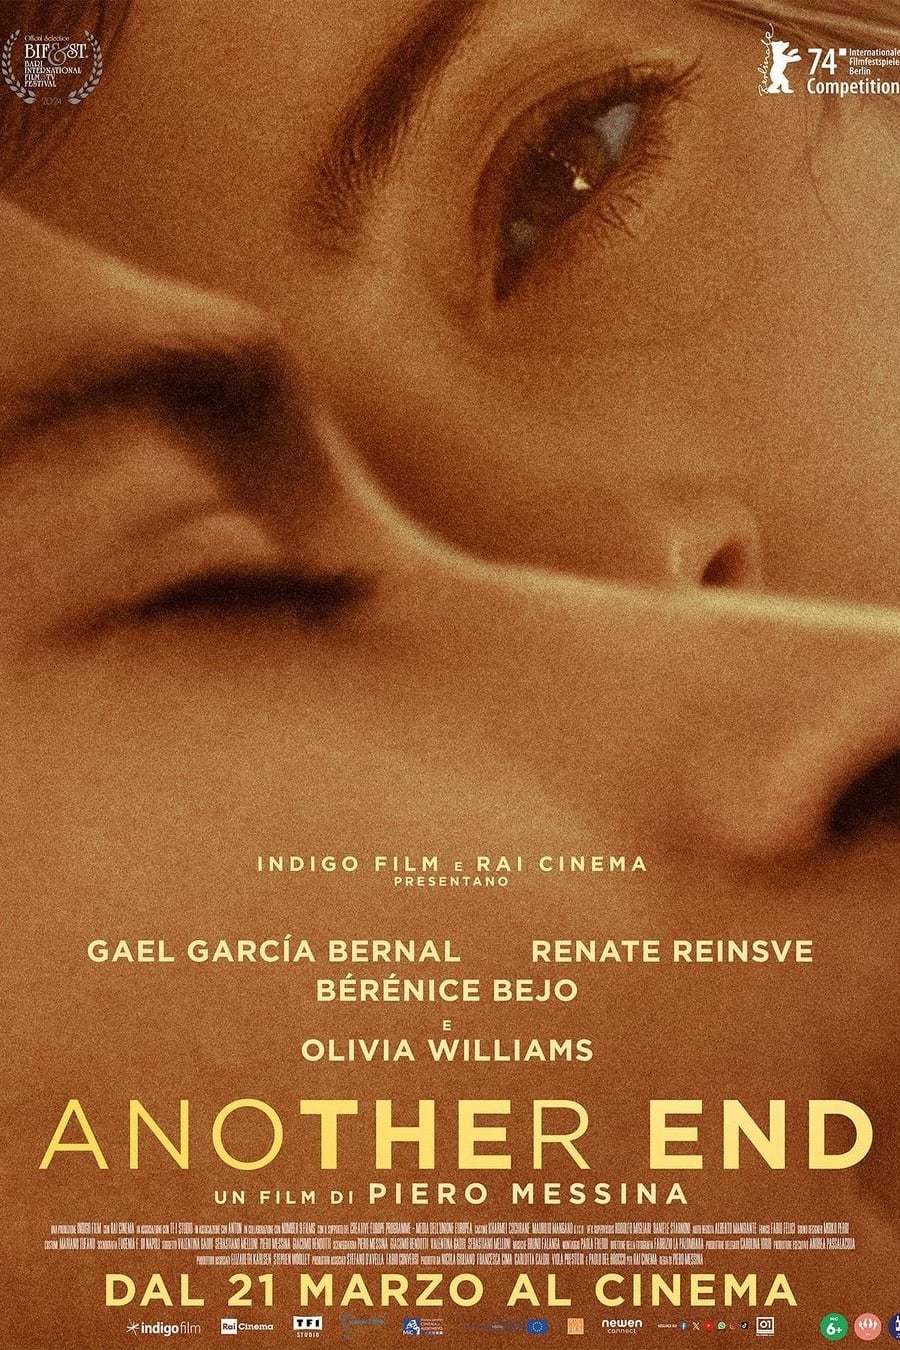 Poster for the movie "Another End"